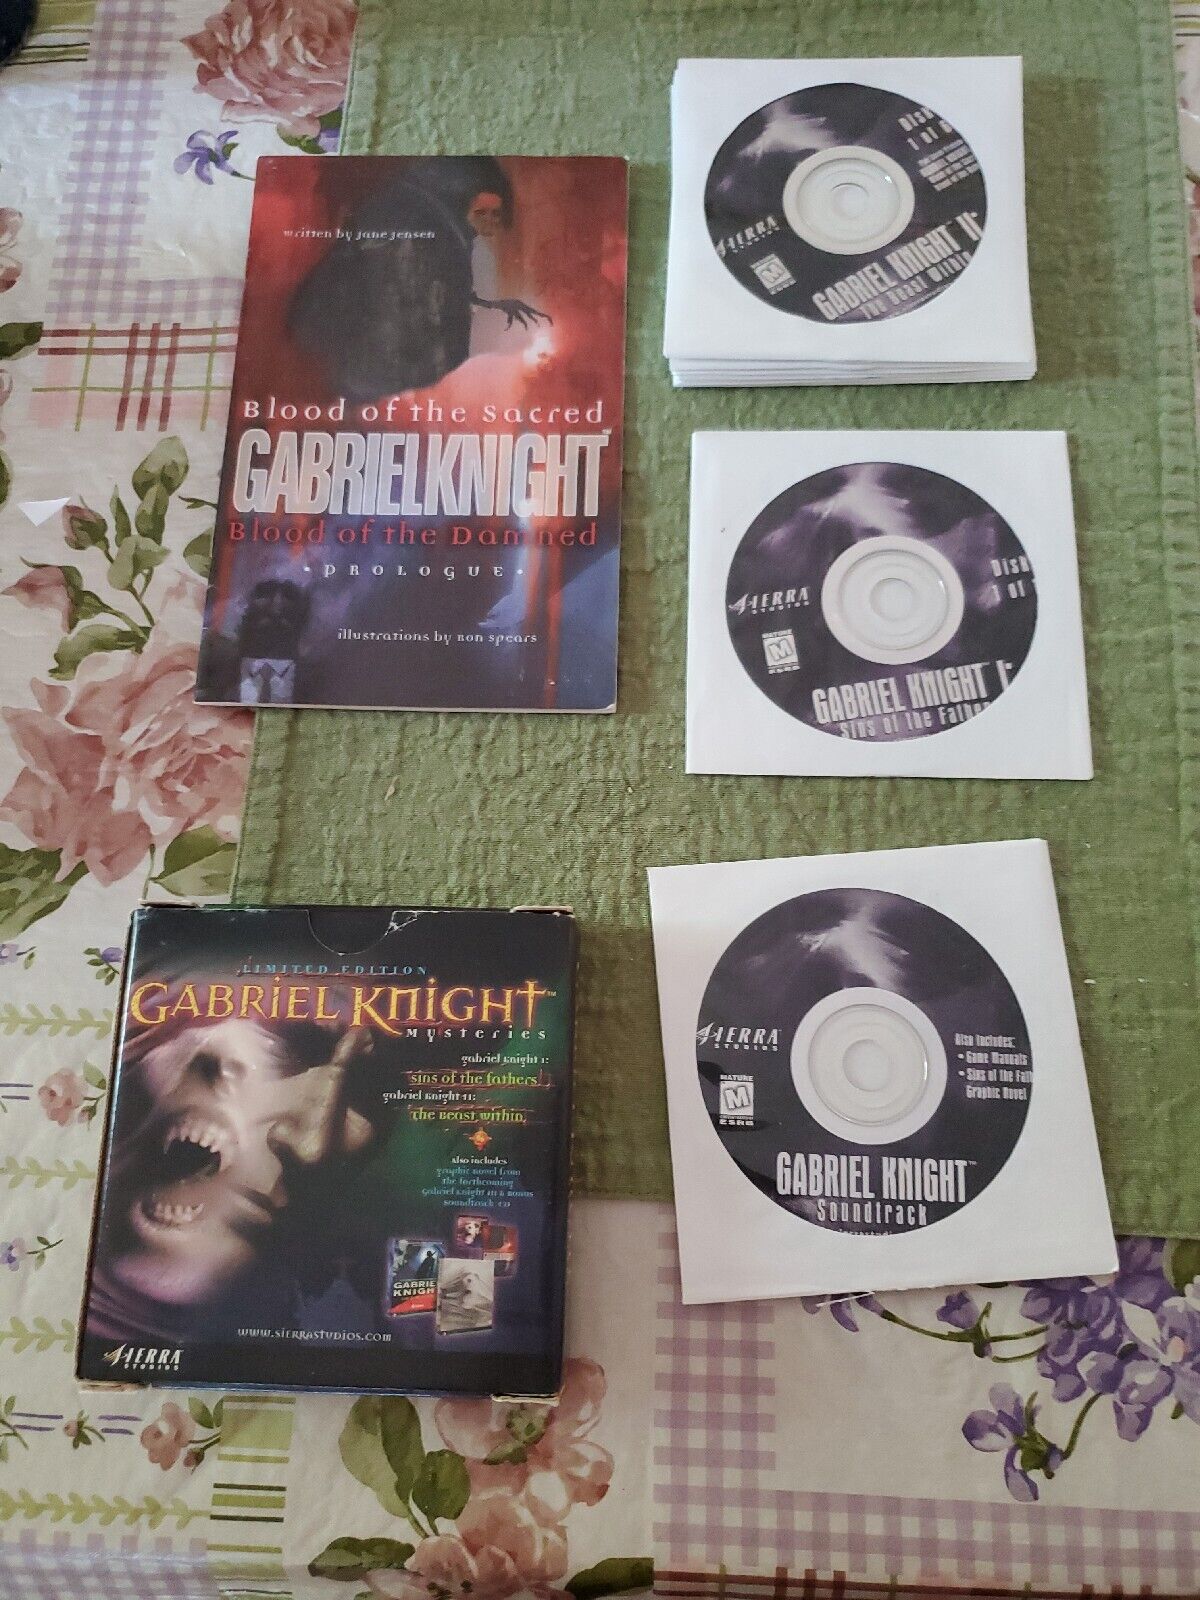 Gabriel Knight Mysteries: Limited Edition PC - Rare Beast Within, Sins Fathers